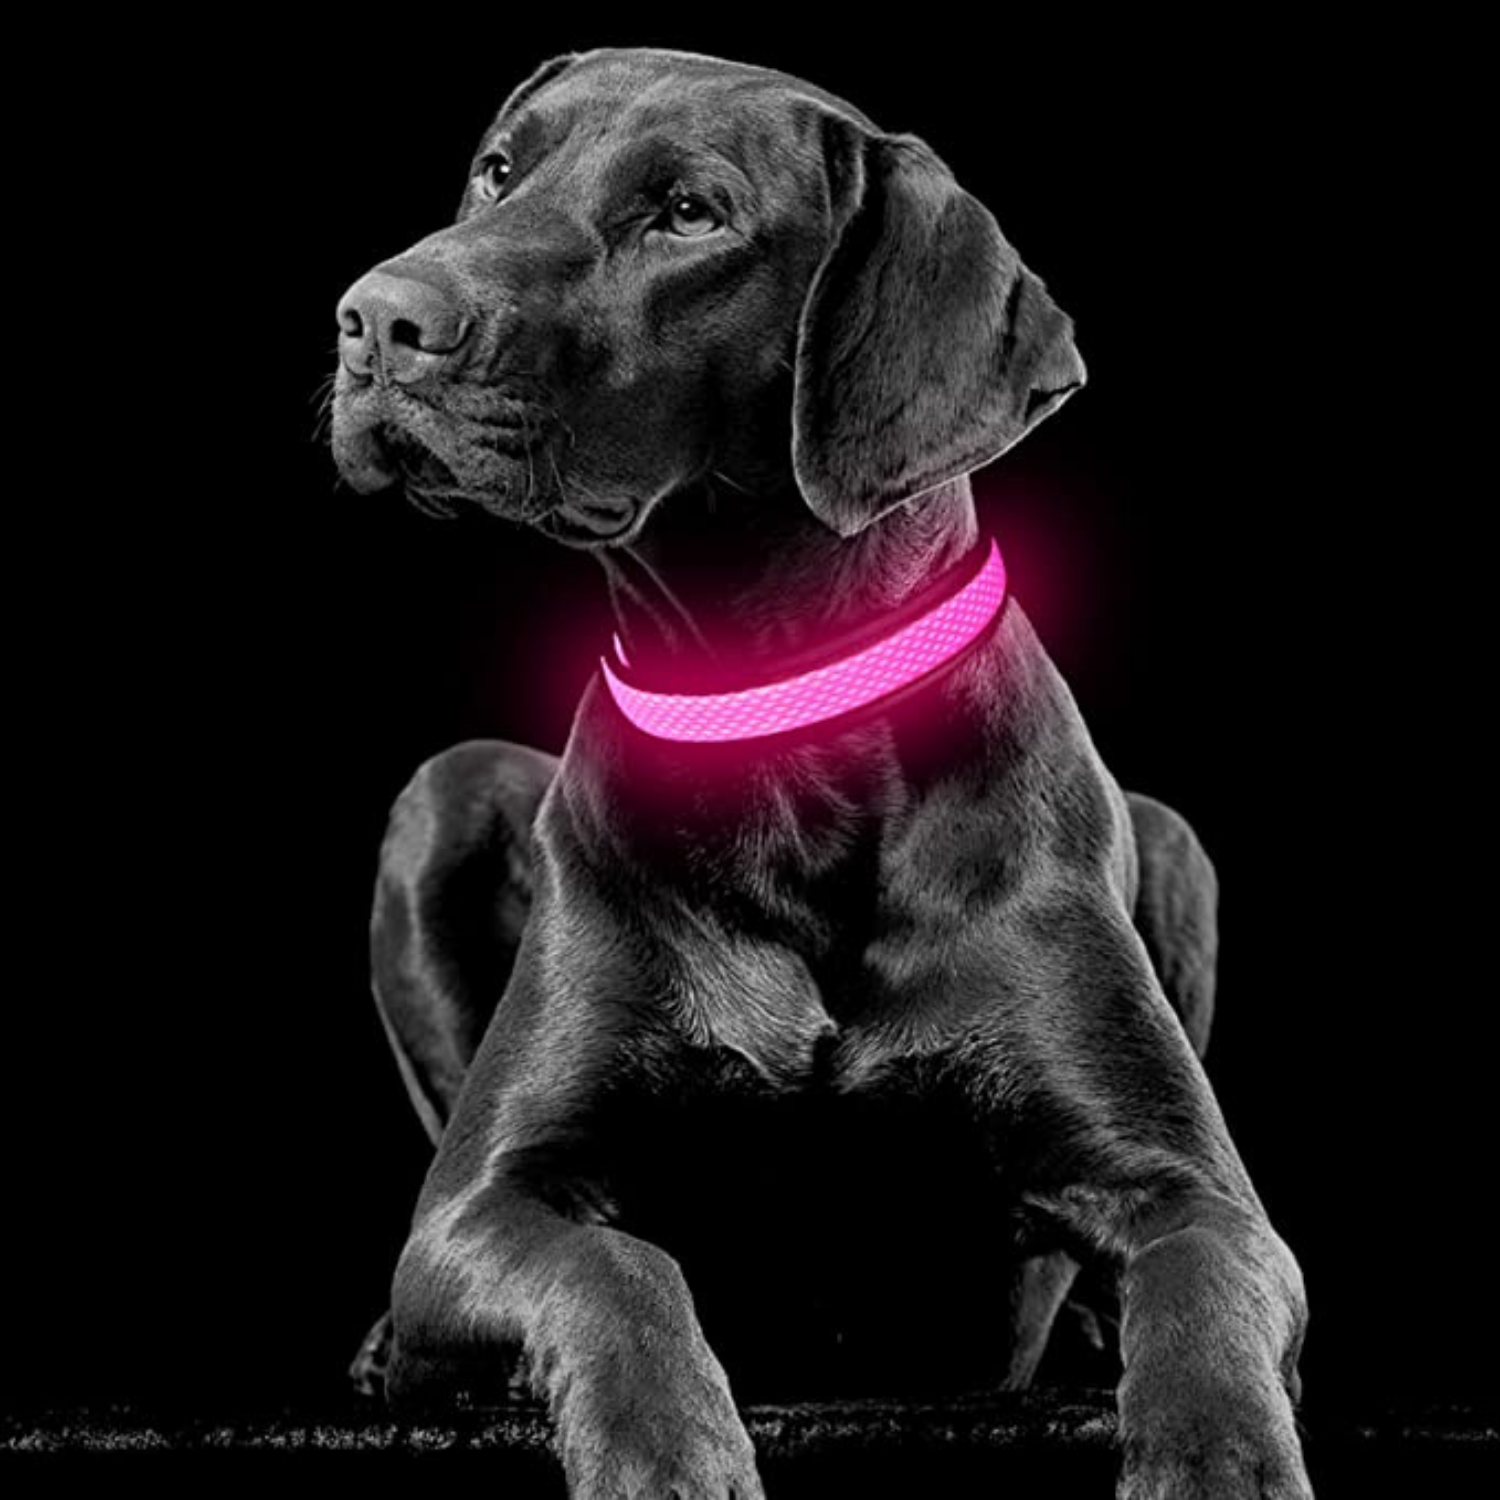 Collar with LED light for safe evening walks